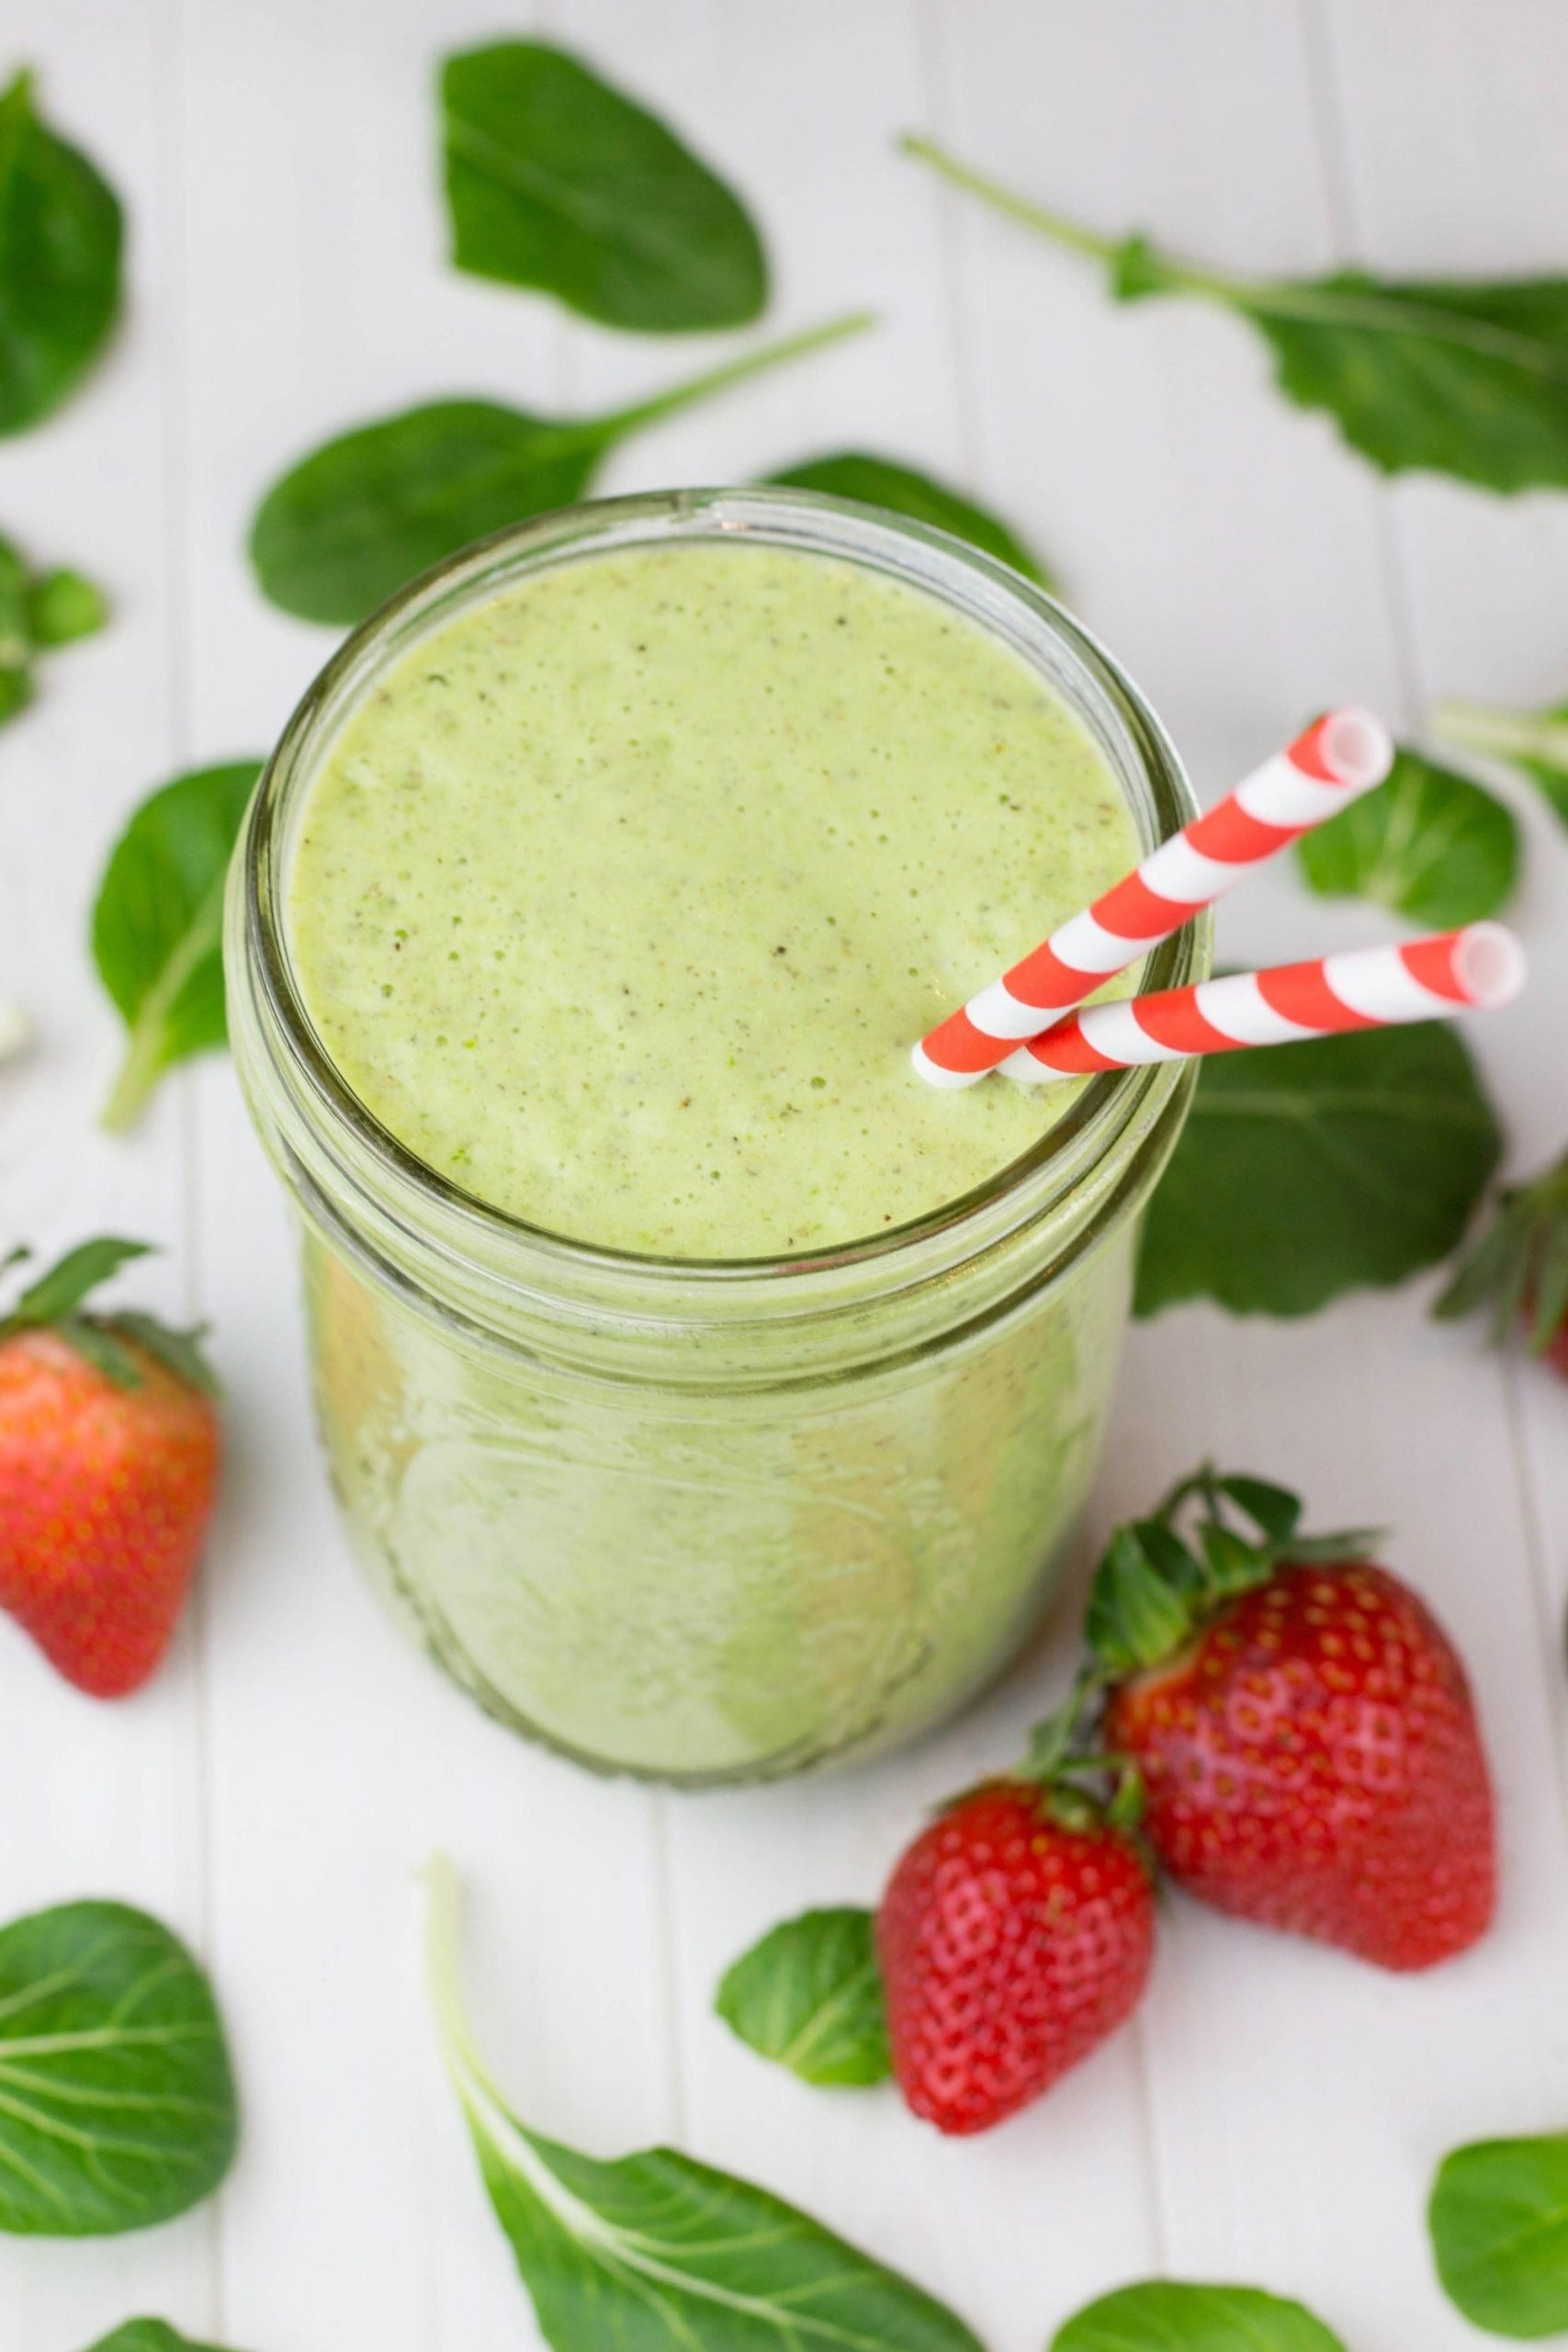 How to Make Healthy Smoothies at Home